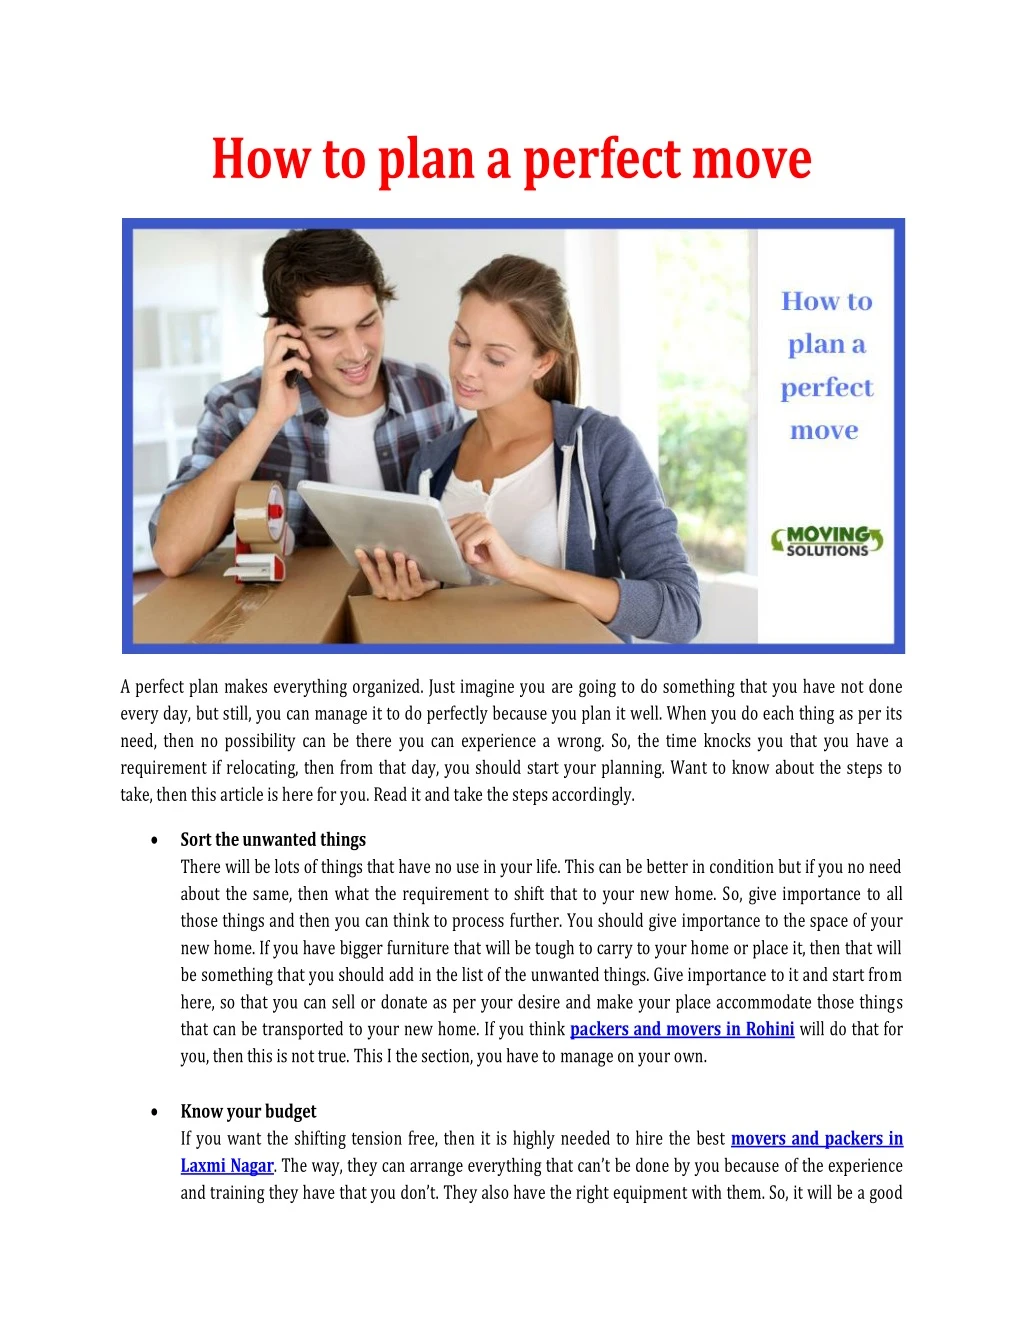 how to plan a perfect move